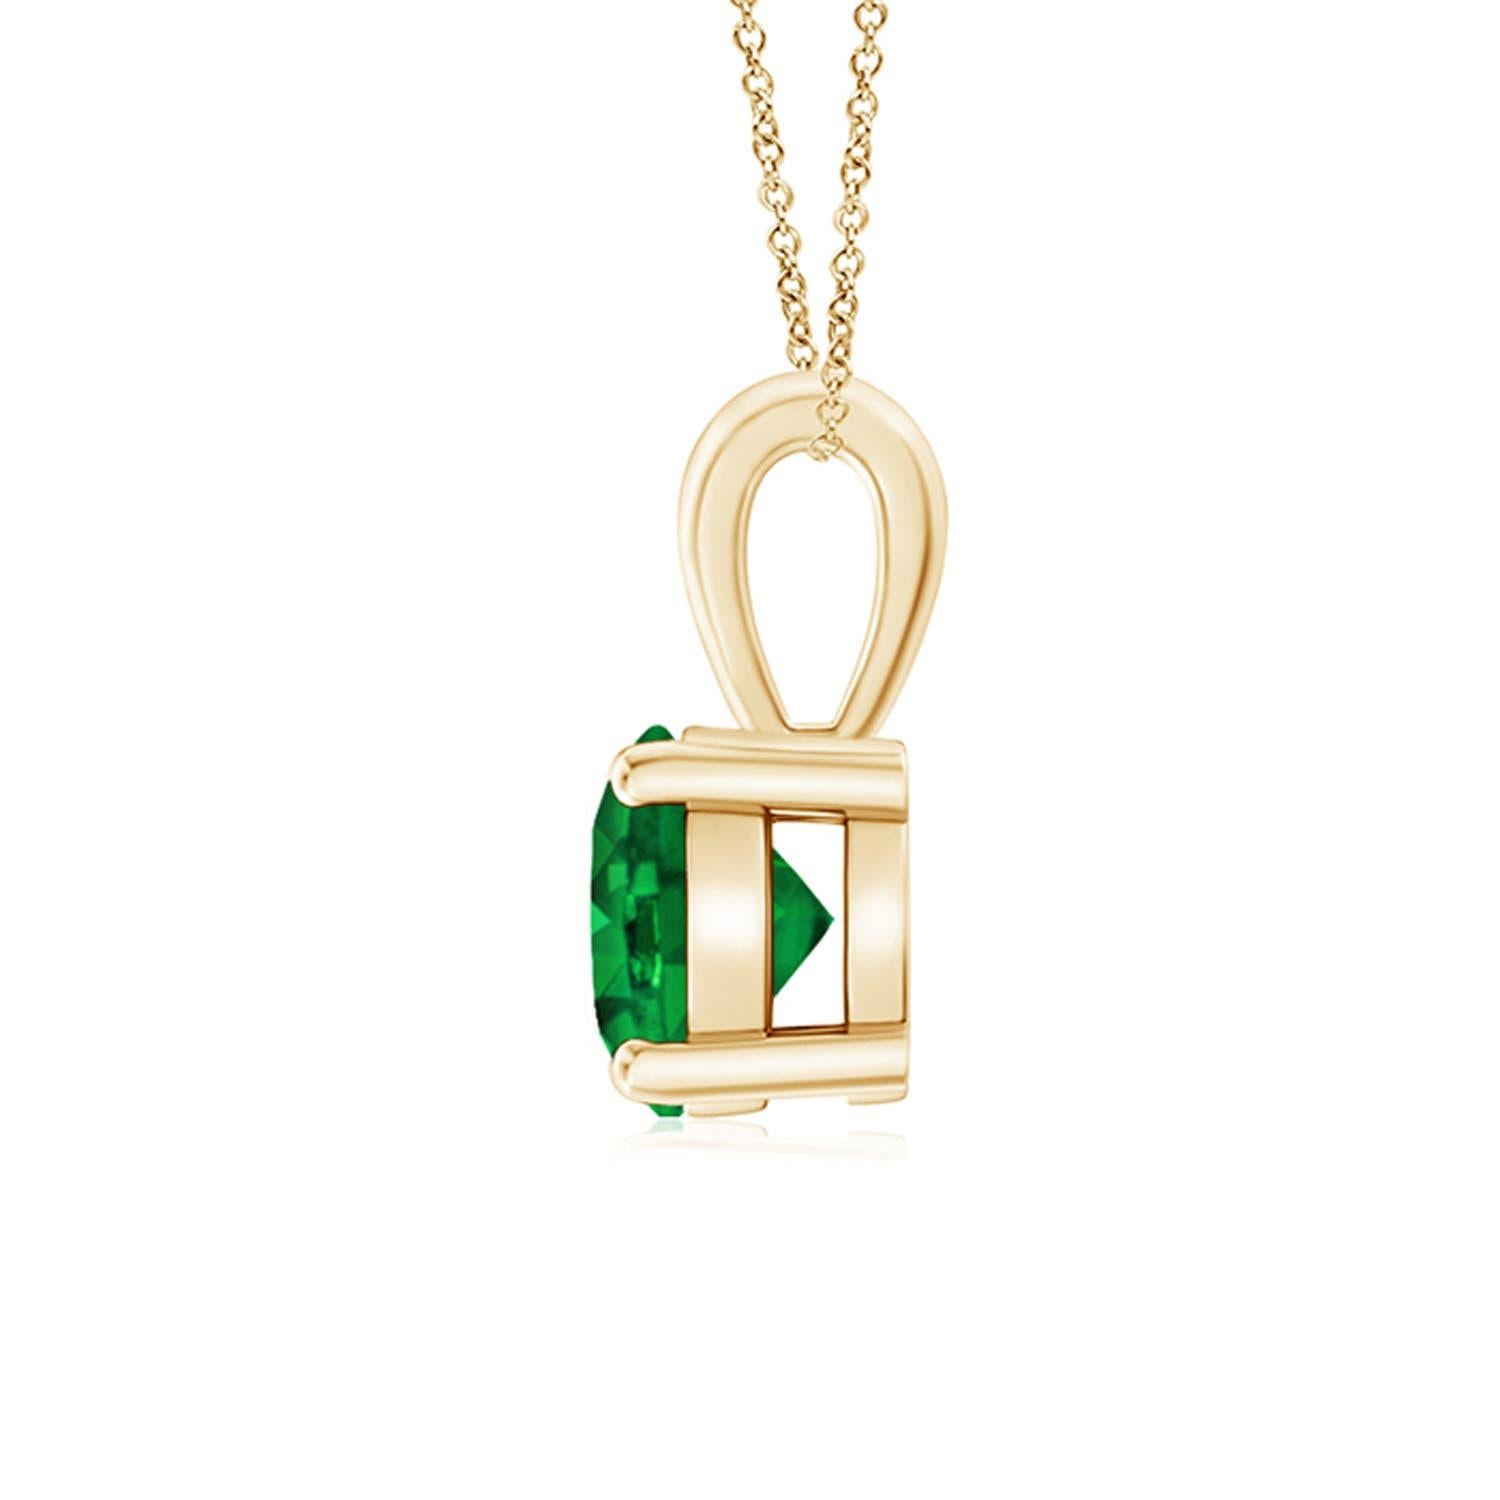 Linked to a lustrous bale is a lush green emerald solitaire secured in a four prong setting. Crafted in 14k yellow gold, the elegant design of this classic emerald pendant draws all attention towards the magnificence of the center stone.
Emerald is